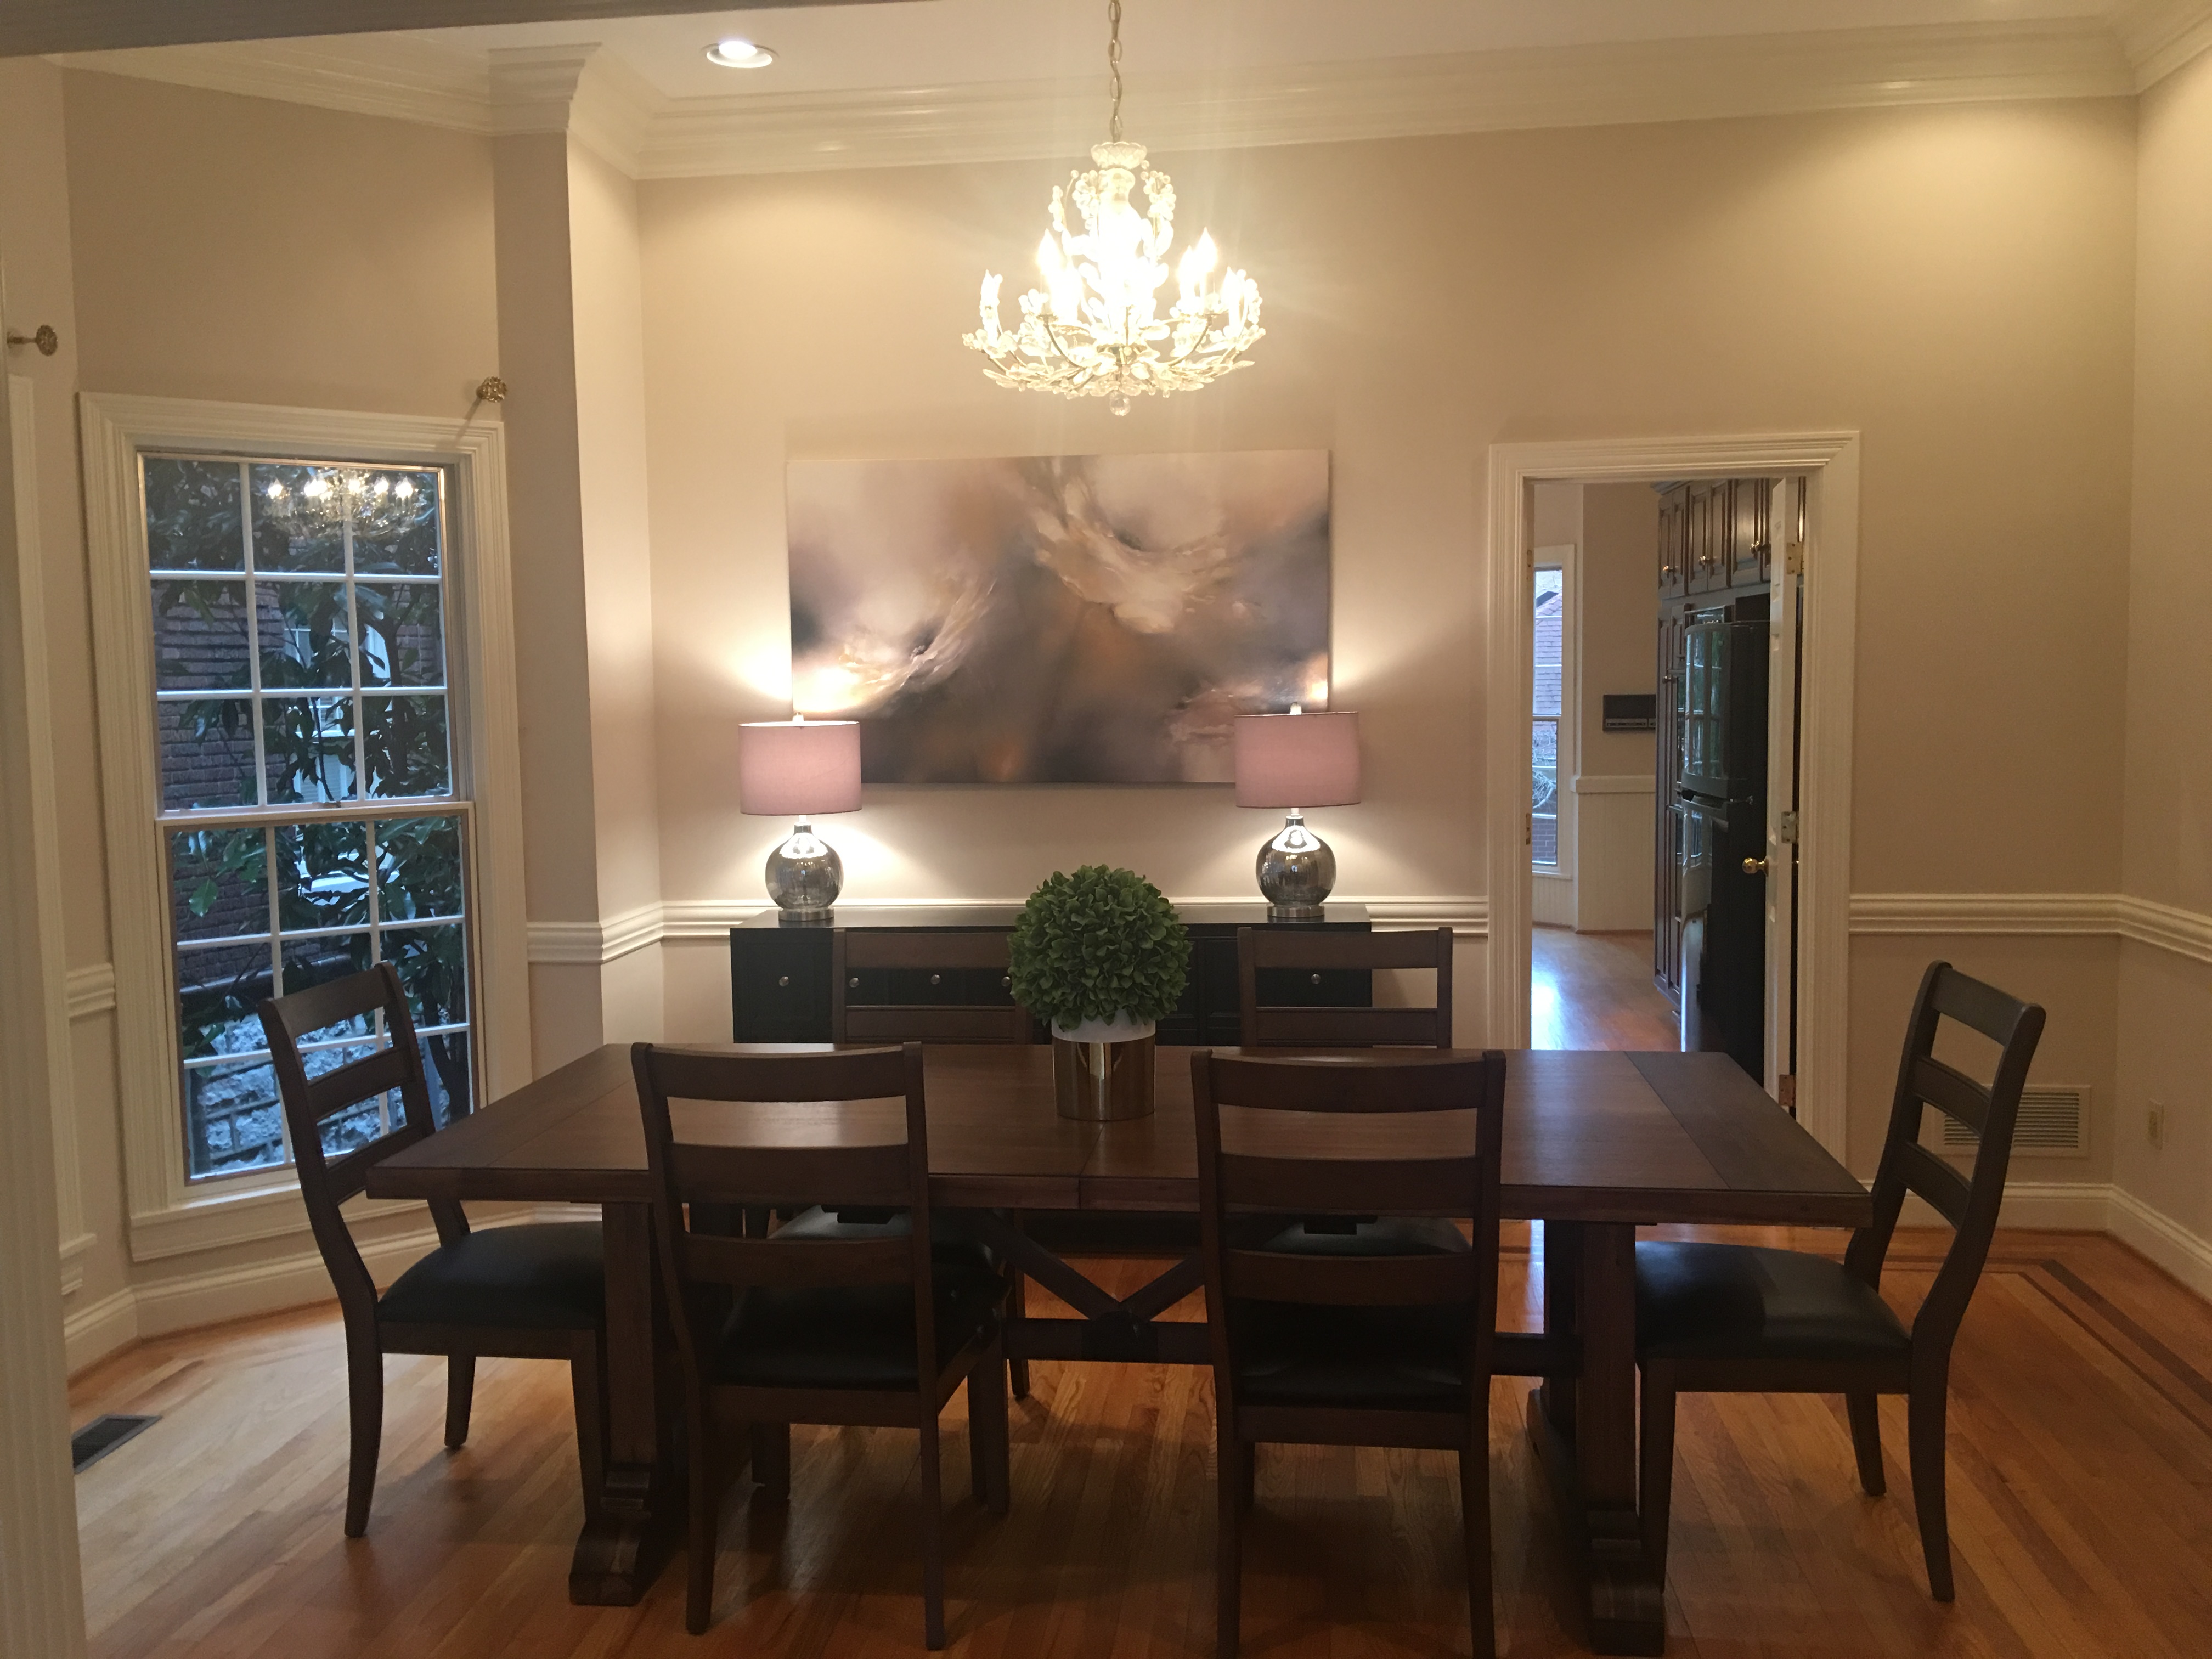 Louisville Kentucky Home Staging, Living Spaces By Lyn, Jennifer Tegeler, Real Estate Home Staging, Sitting Room Staging, Hardwood Flooring, Inlaid Hardwood Flooring Detail, Artwork, Dining Room, Area Rug, Lighting, Accessories